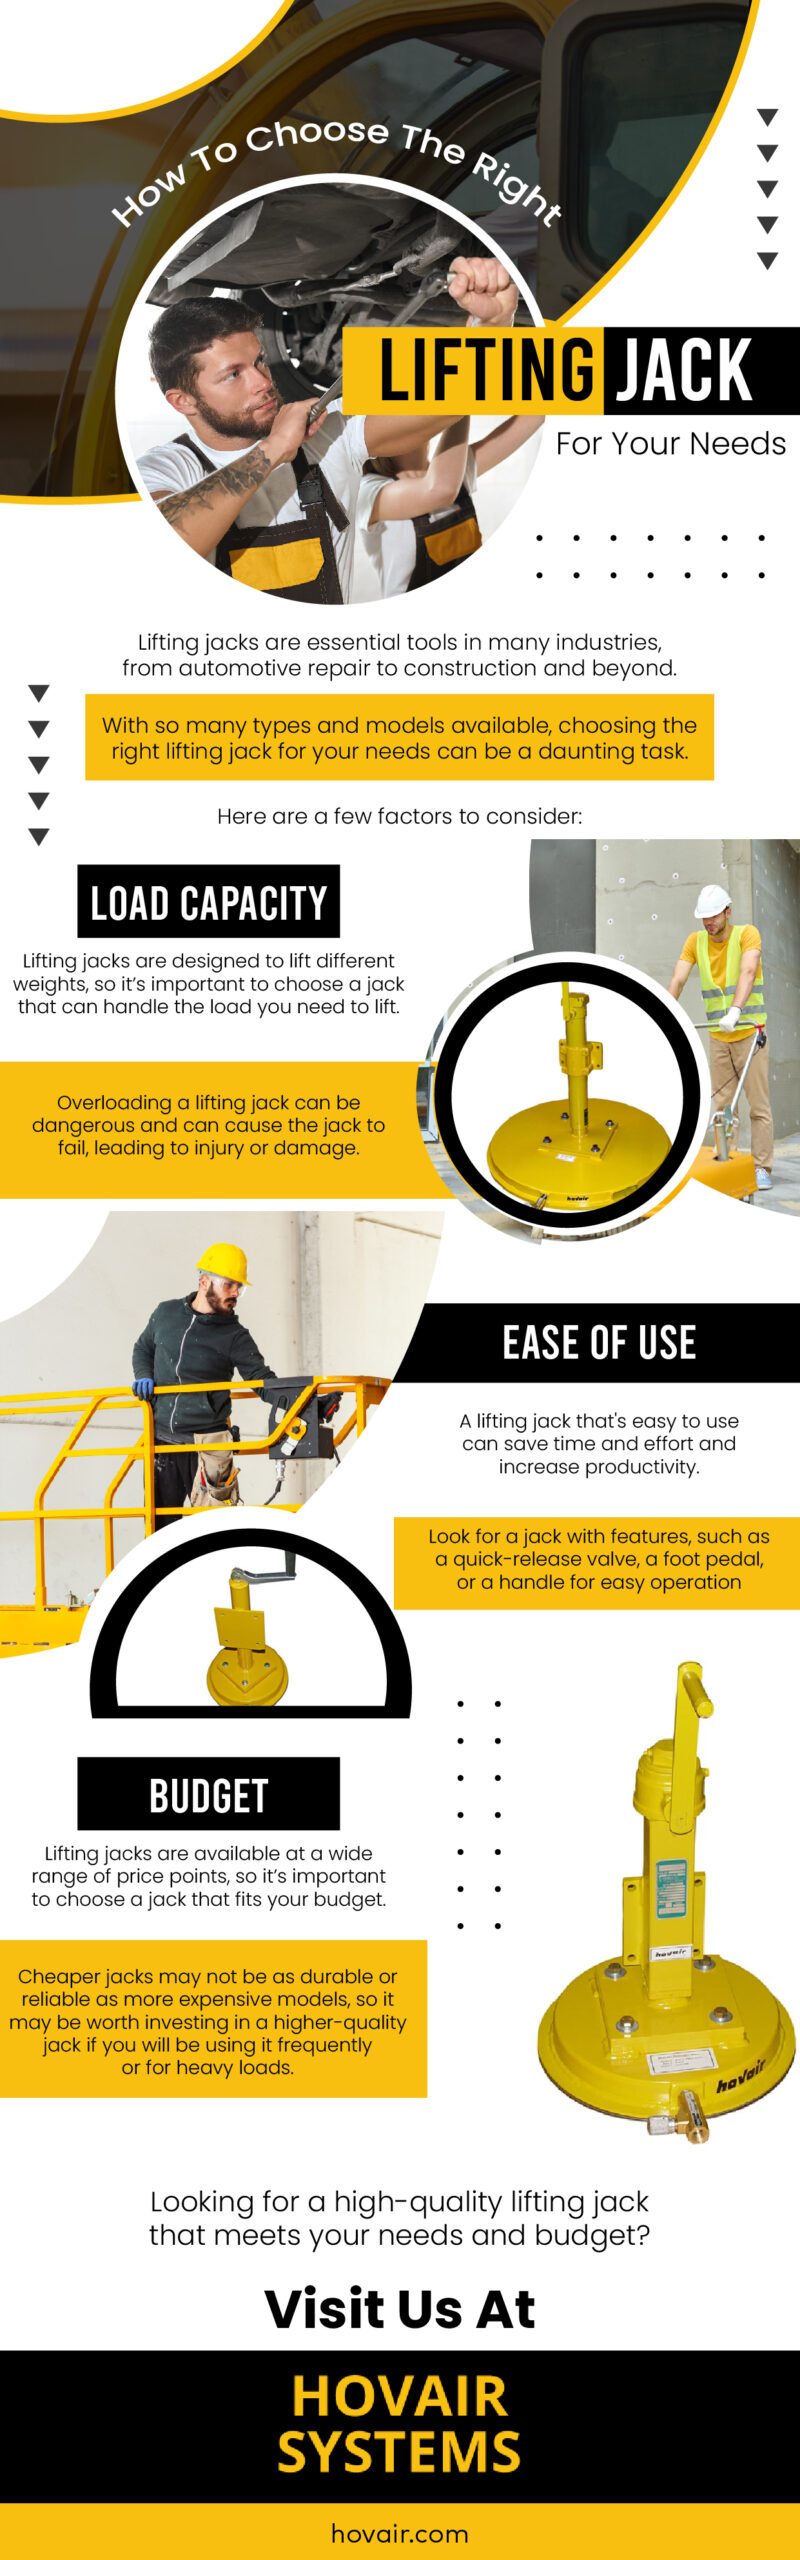 How To Choose The Right Lifting Jack For Your Needs